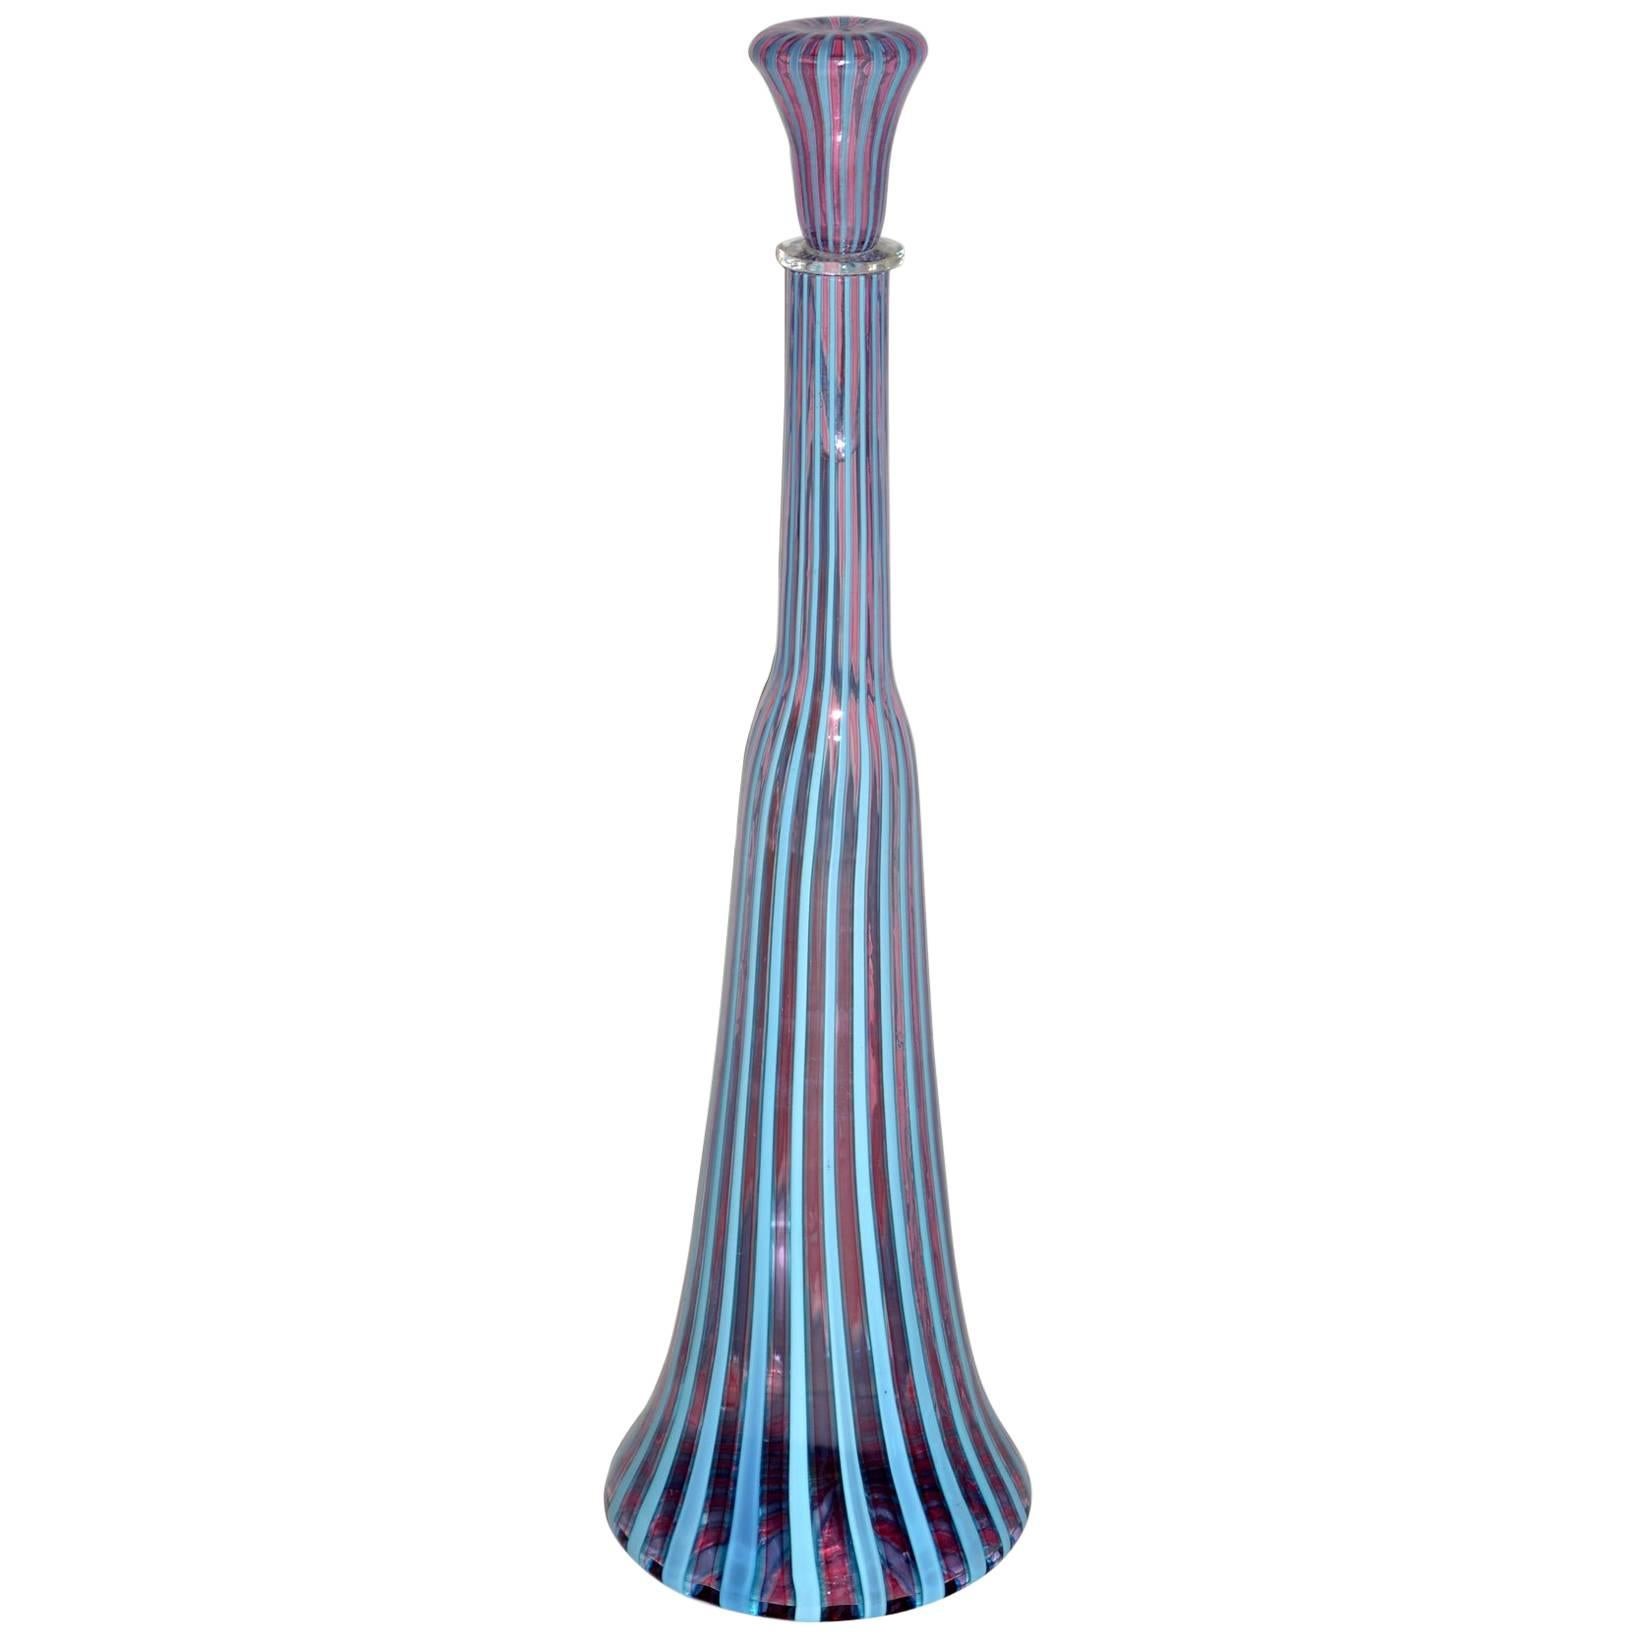  Murano Blown Glass Decanter Attributed to Vetreria Fratelli Toso Signed  For Sale